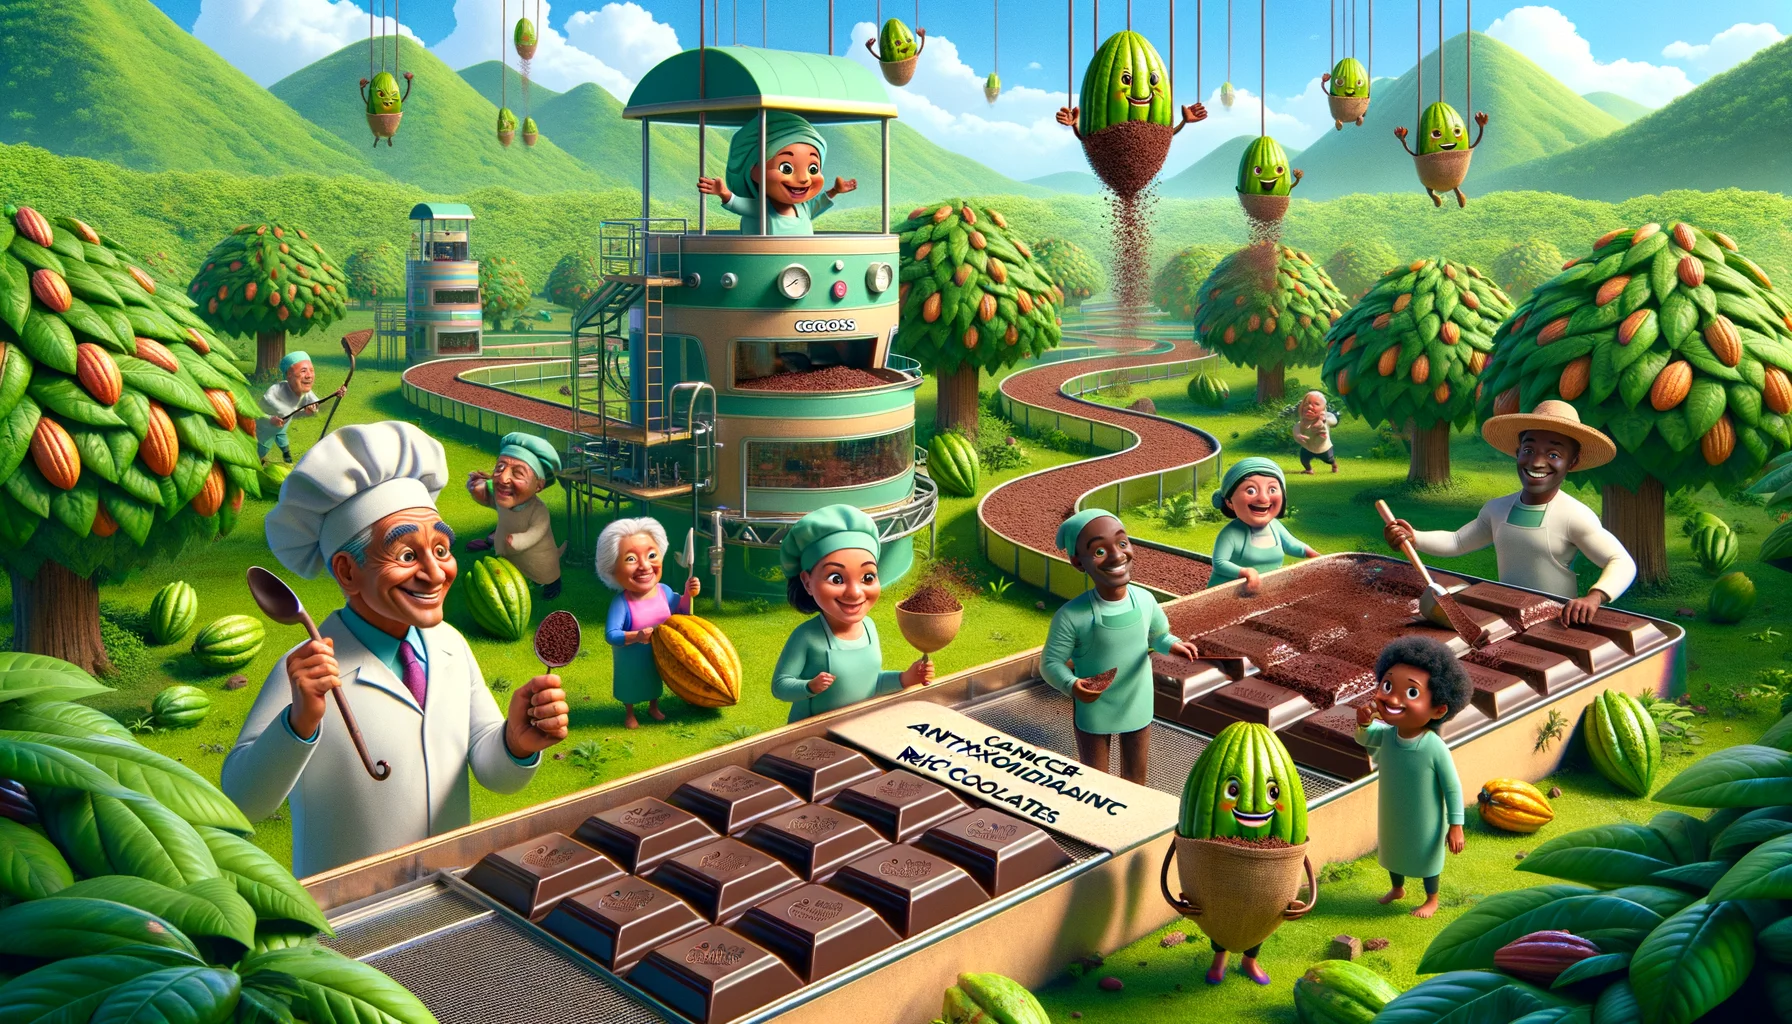 Imagine an amusing, realistic scene highlighting 'Cancer-Fighting Antioxidant Rich Chocolates'. A green, luscious garden filled with luxurious cocoa trees. On one side, a group of diverse individuals, an elderly Hispanic man, a young Asian woman, a middle-aged Black woman and a playful Caucasian boy, are diligently harvesting large cocoa pods. In the middle section, a fantastical assembly line is visible: cheerful machines process cocoa into dark chocolates. At the end of the line, fit in neat, gleaming wrapping labeled 'Cancer-Fighting Antioxidant Rich Chocolates', are chocolate bars. Descend from the sky are little cartoonish anti-cancer and antioxidant symbols, playfully interacting with the chocolates, implying their healthy nature.